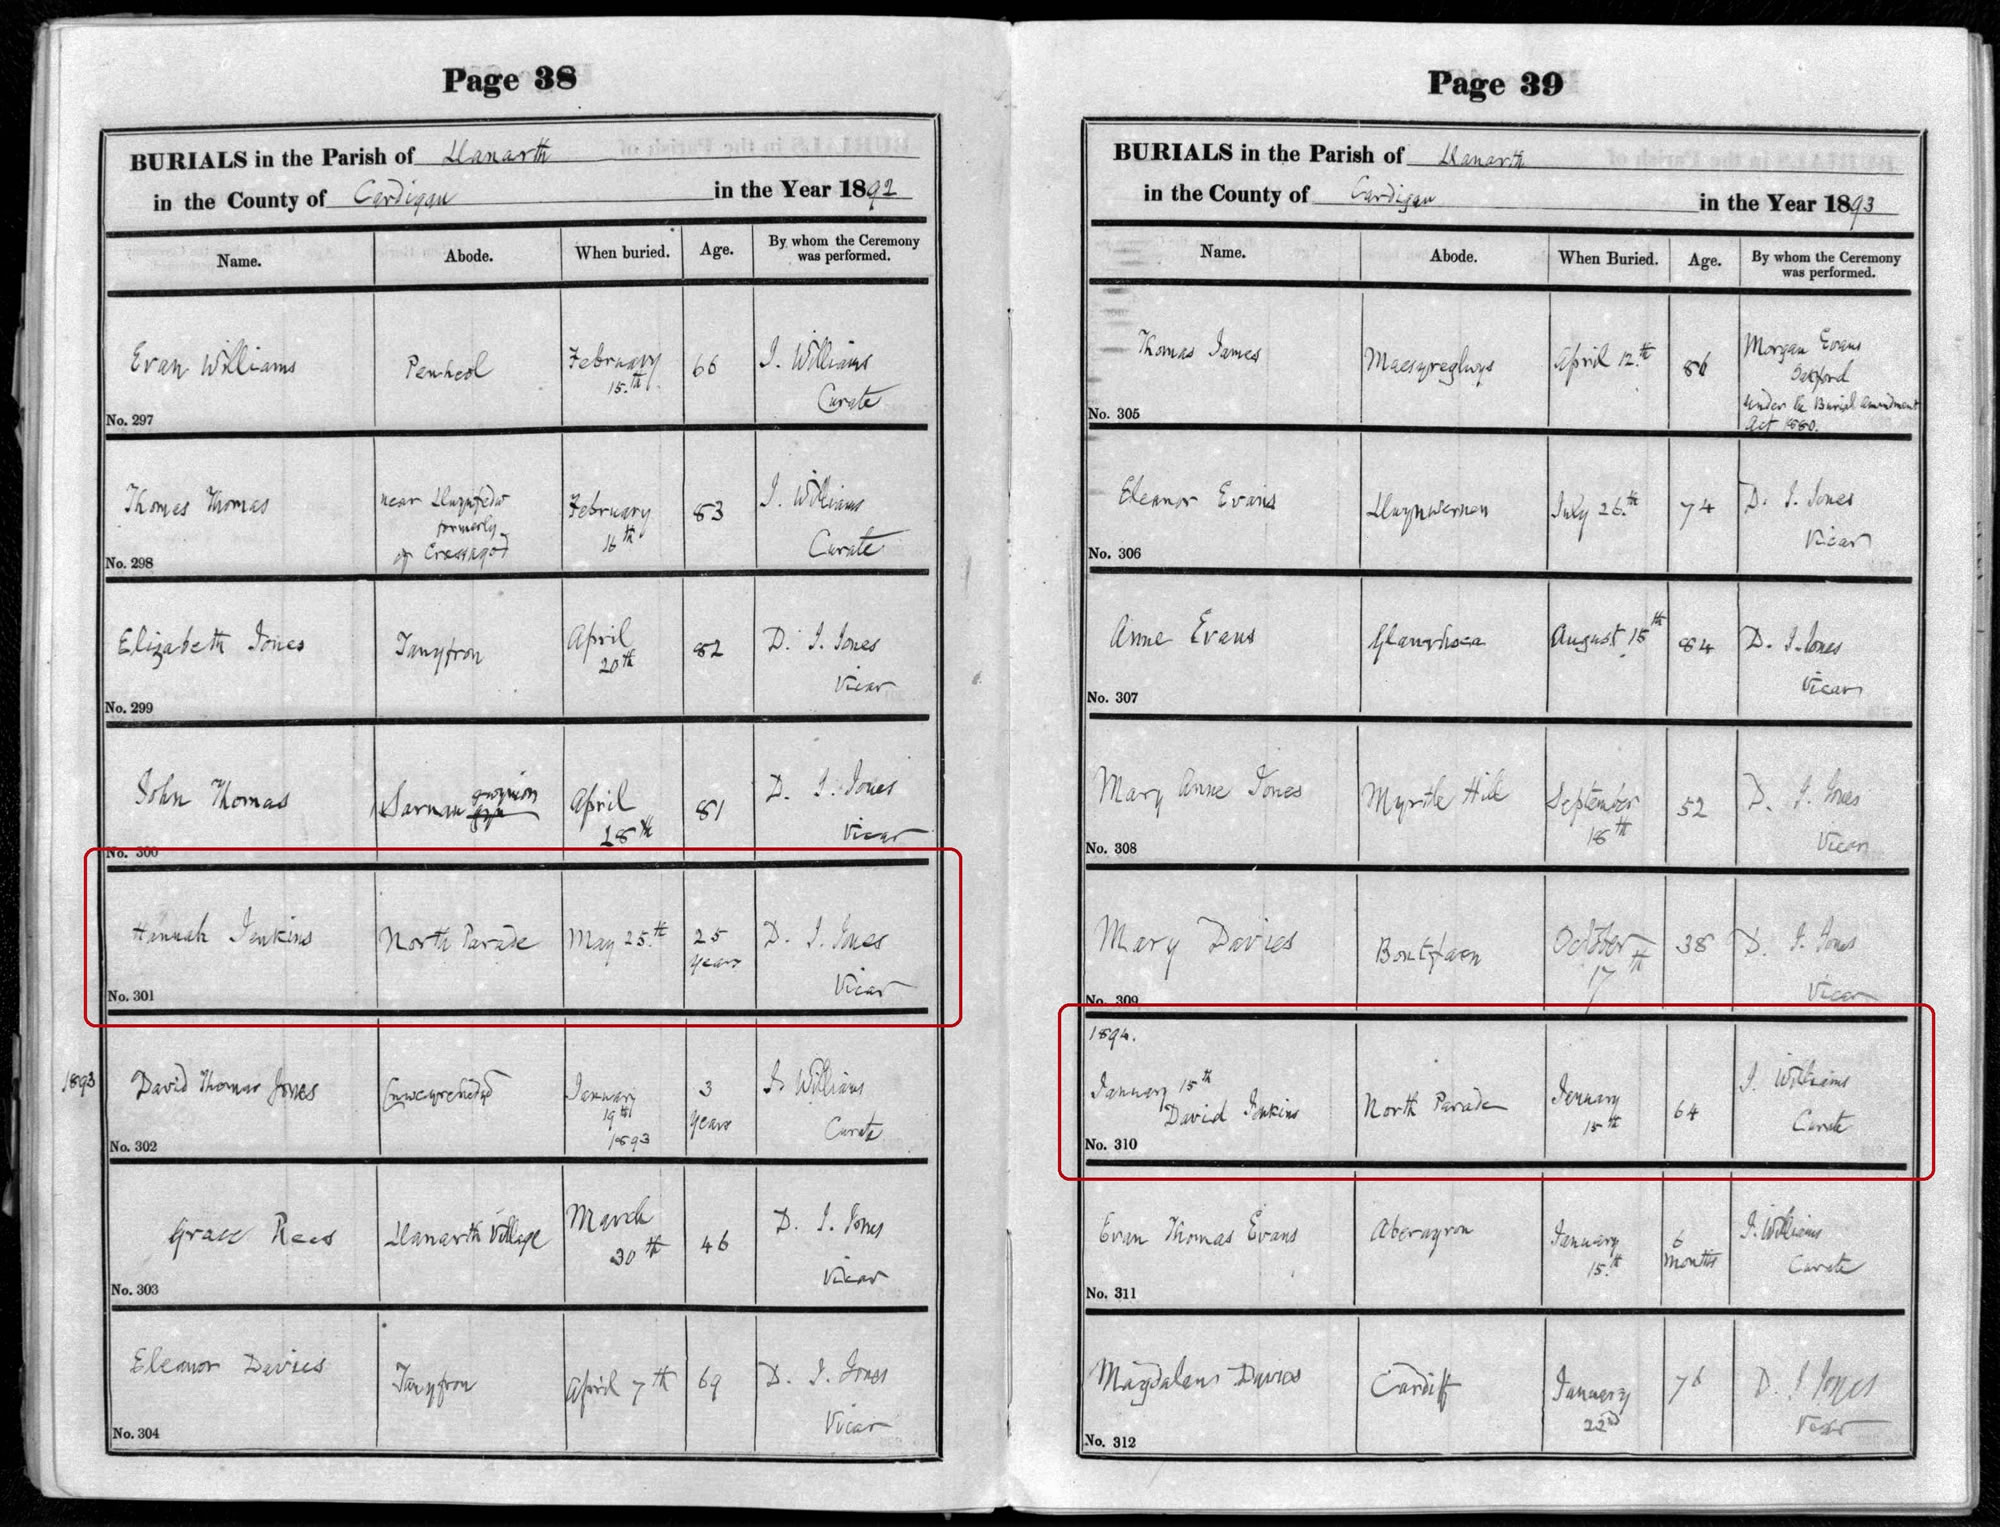 Ruth Jones's great great grandfather, Captain David Jenkins, and her great aunt, Hannah are found in the
		Llanarth burial register for 1892 and 1893